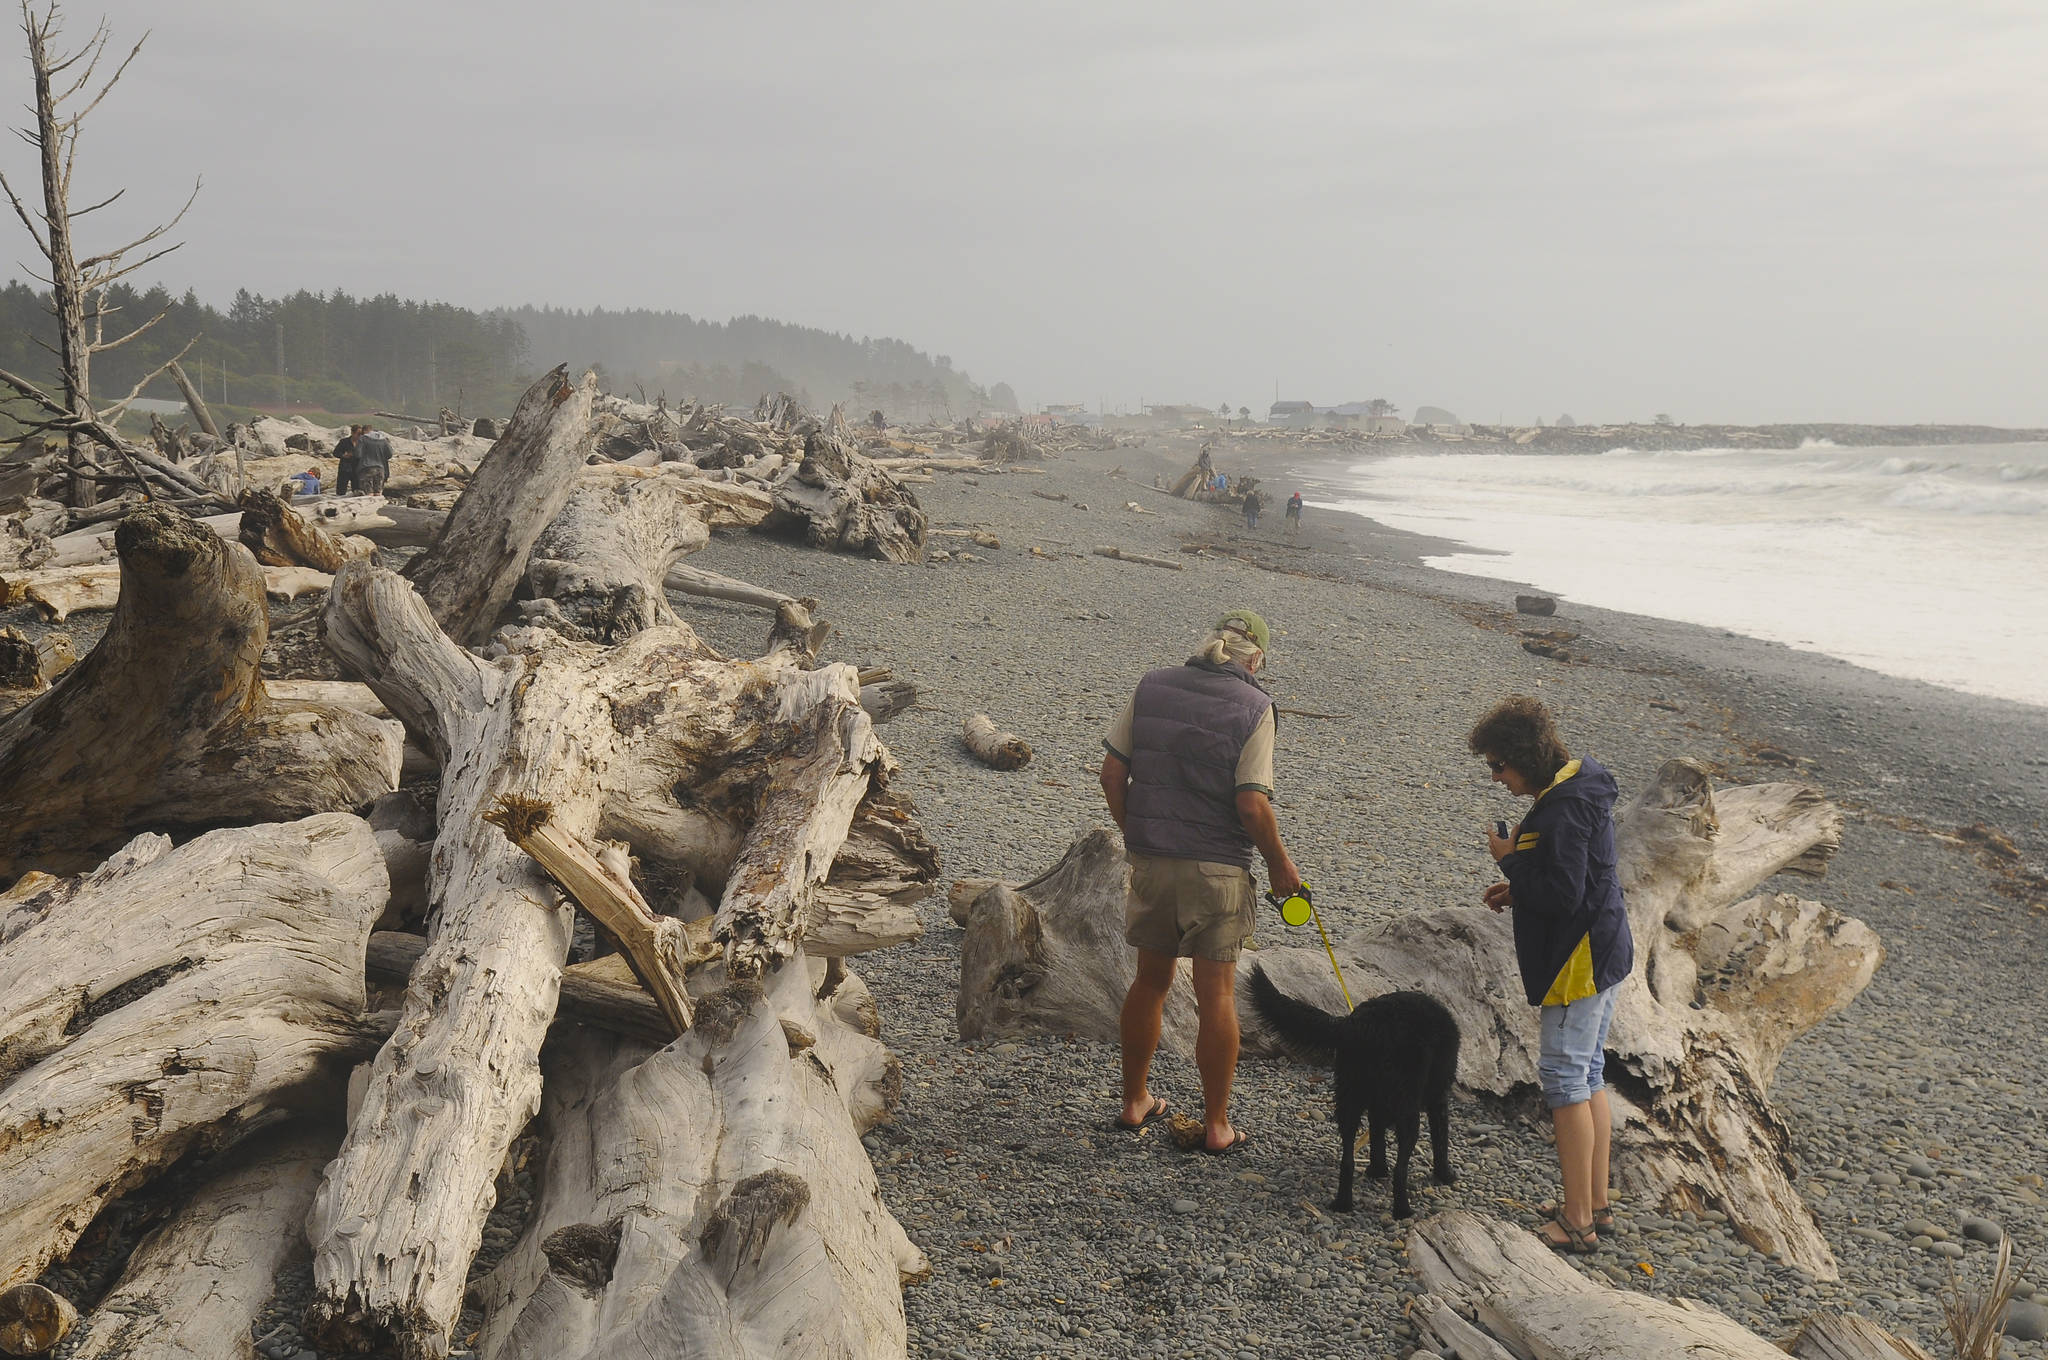 Olympic National Park has closed its park service-managed beaches and coastal areas on the Olympic Peninsula to park visitors - including Rialto Beach (pictured here in August 2019) - to help slow the spread of the novel coronavirus. Sequim Gazette file photo by Michael Dashiell